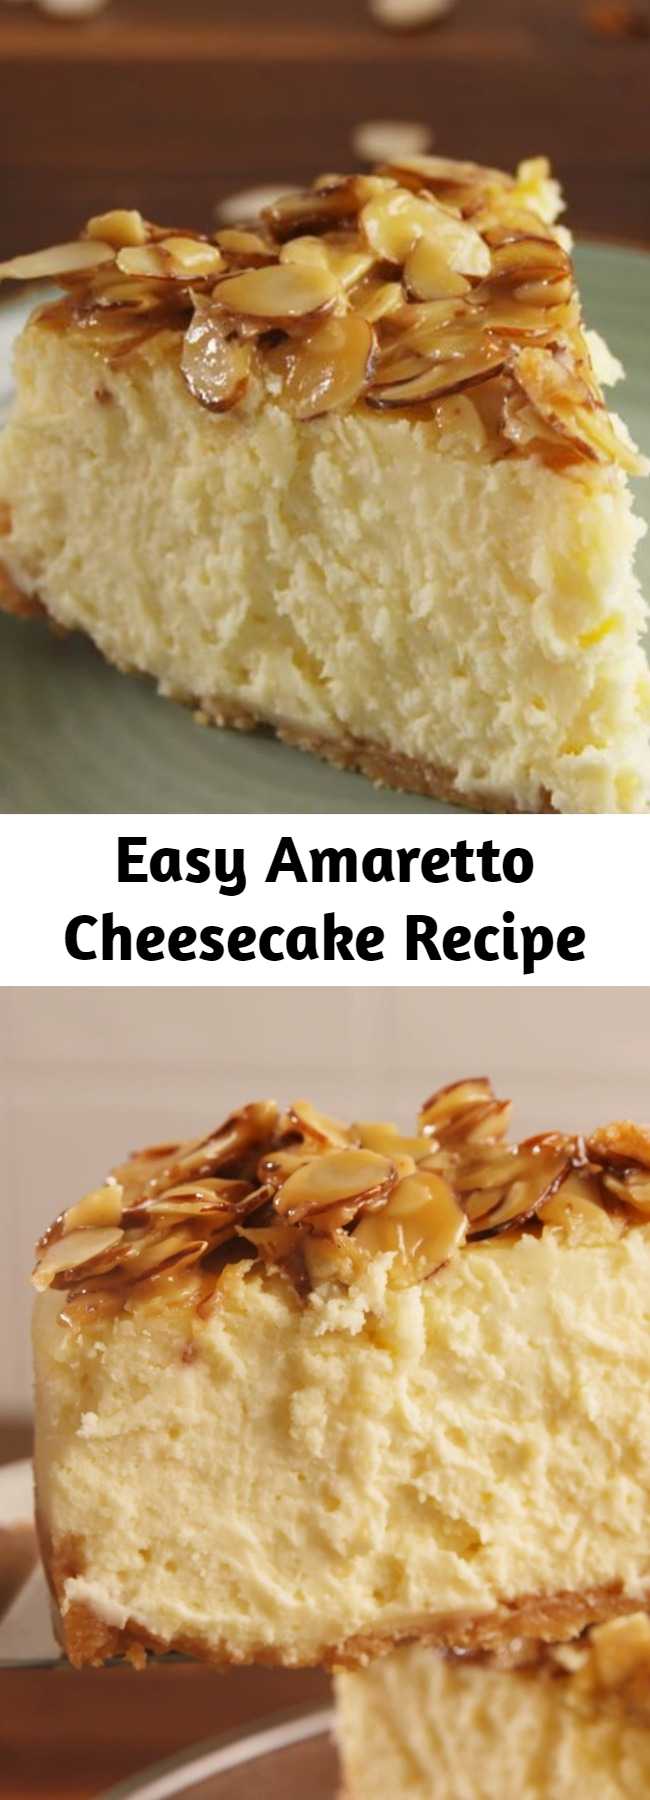 Easy Amaretto Cheesecake Recipe - If you love almonds, you need this cheesecake. This is the perfect pairing. #easy #recipe #amaretto #almond #cheesecake #dessert #vanilla